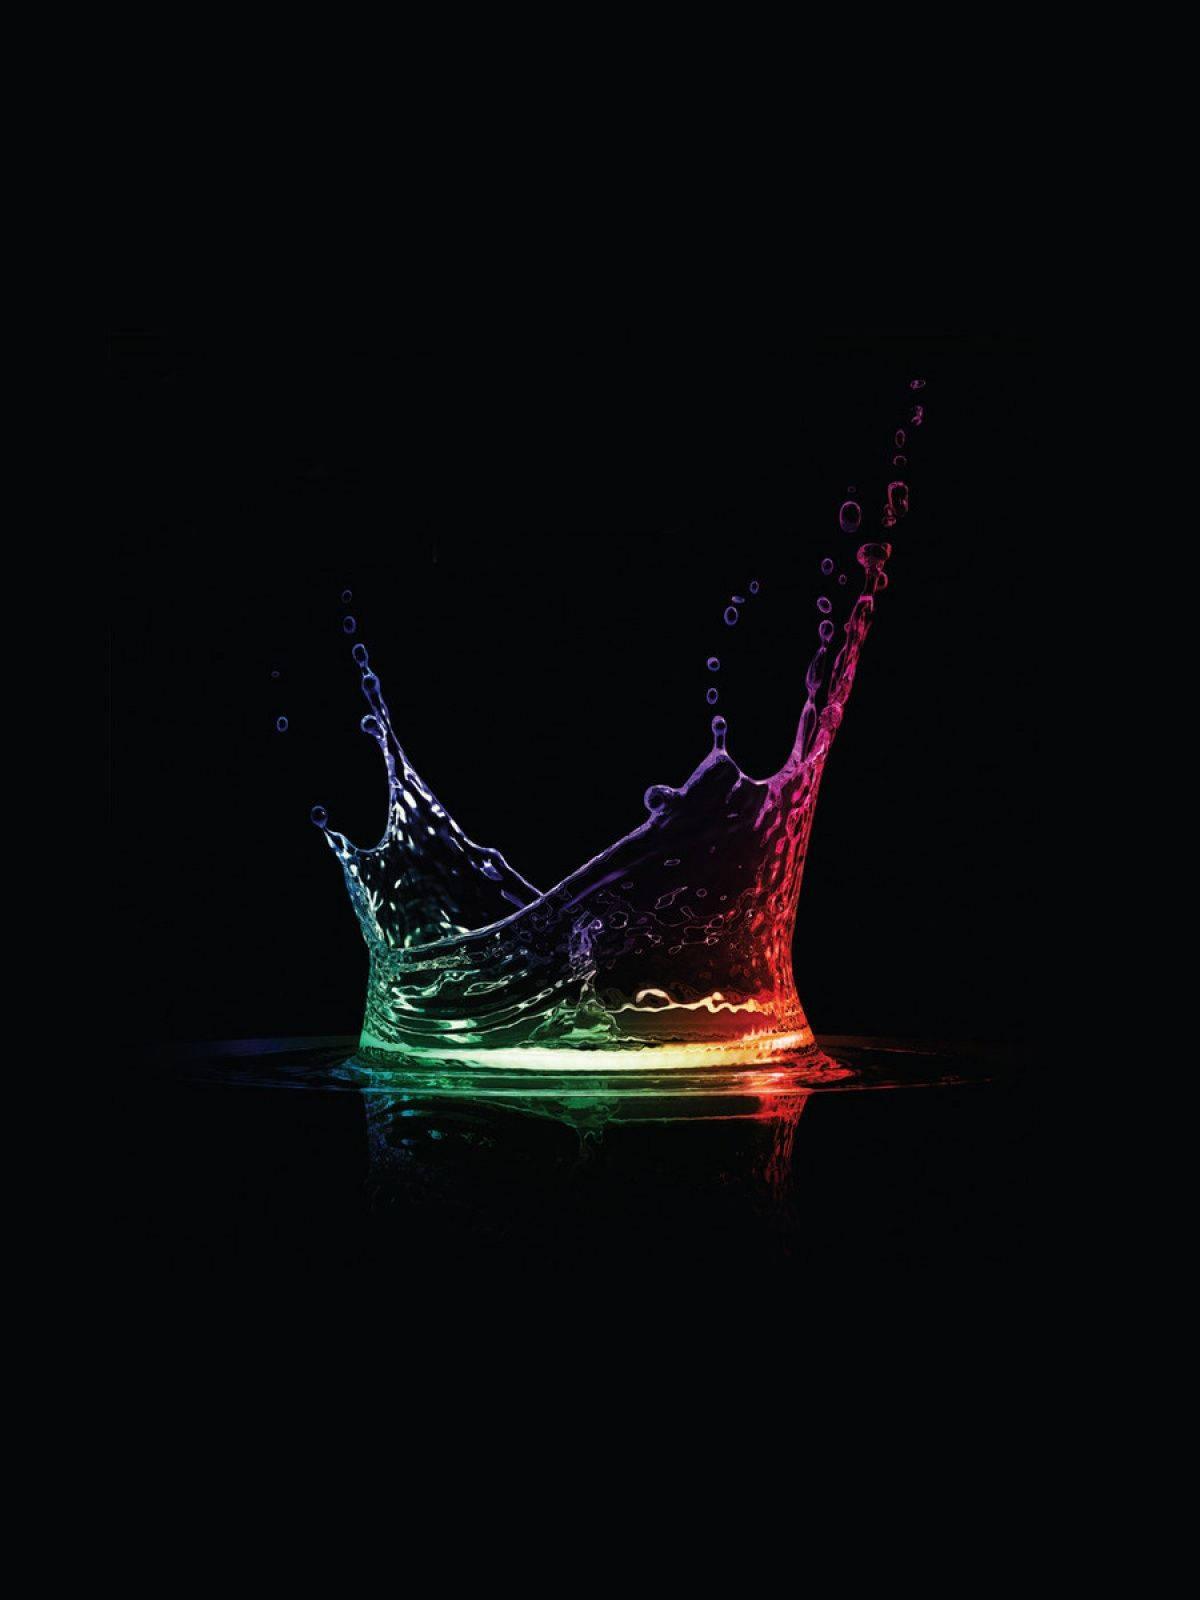 Black Android Colorful Water Splash Background